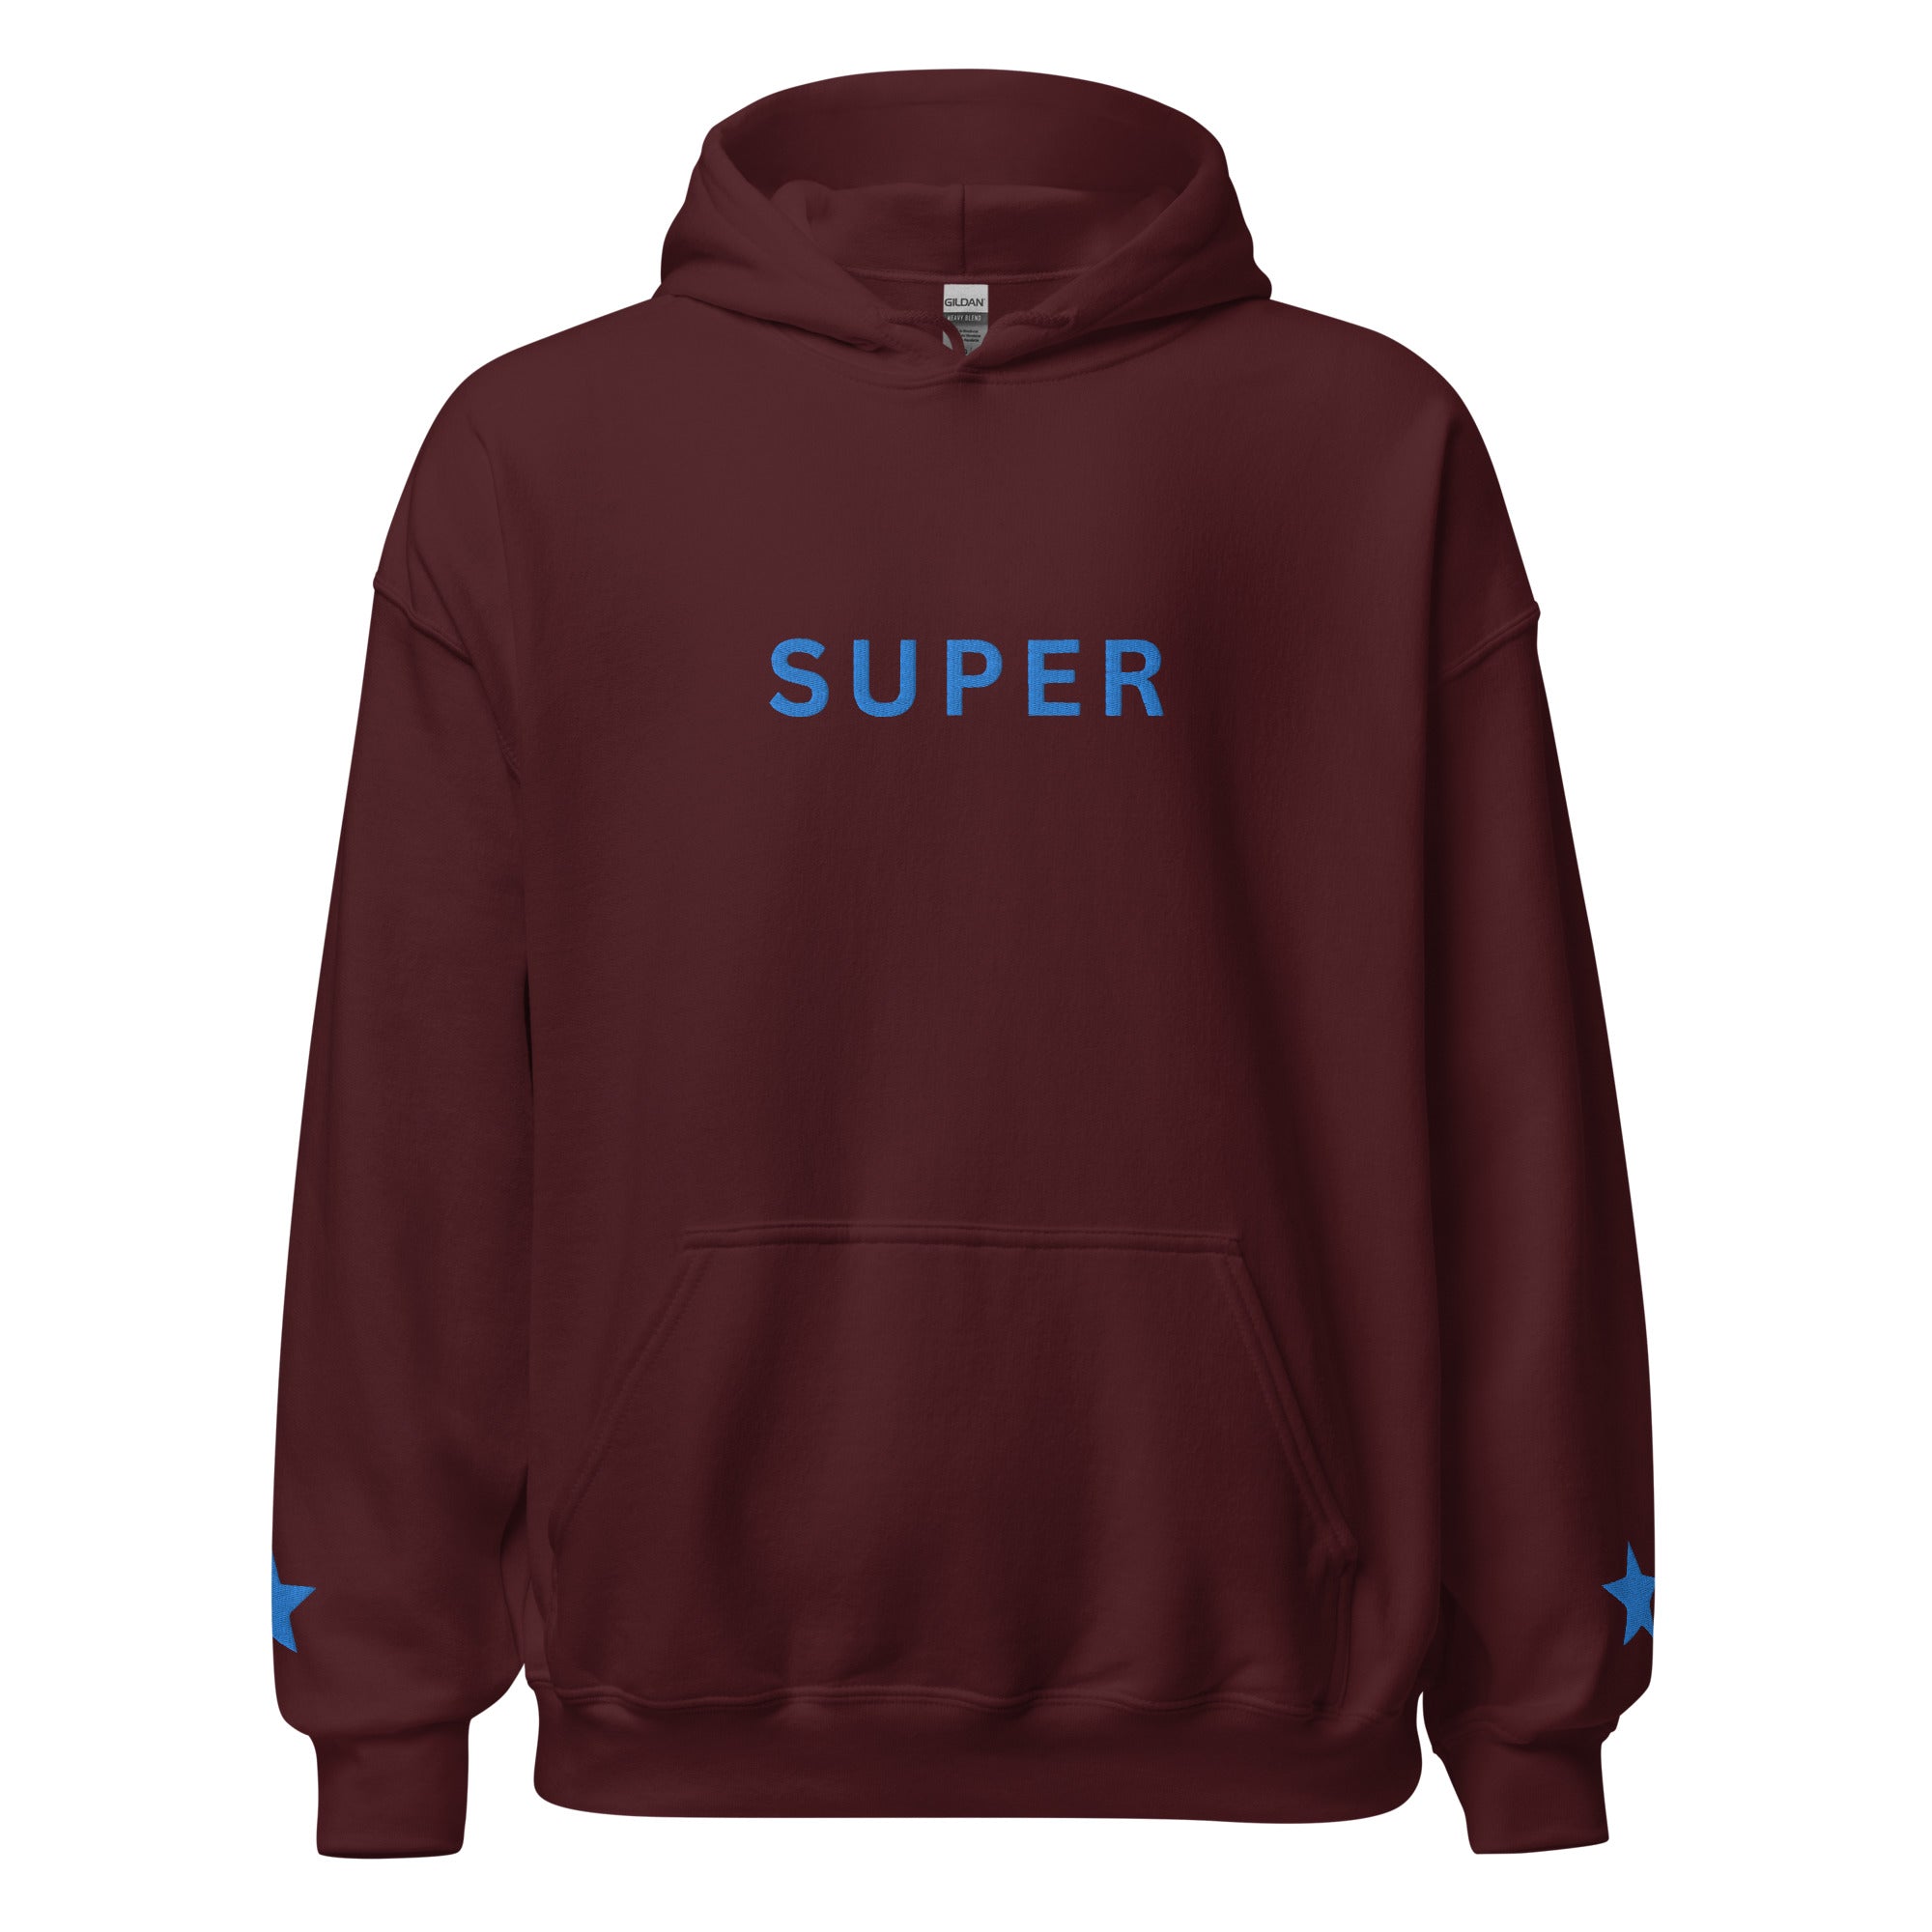 Super Cyborg Franky Embroidered Unisex Anime Hoodie